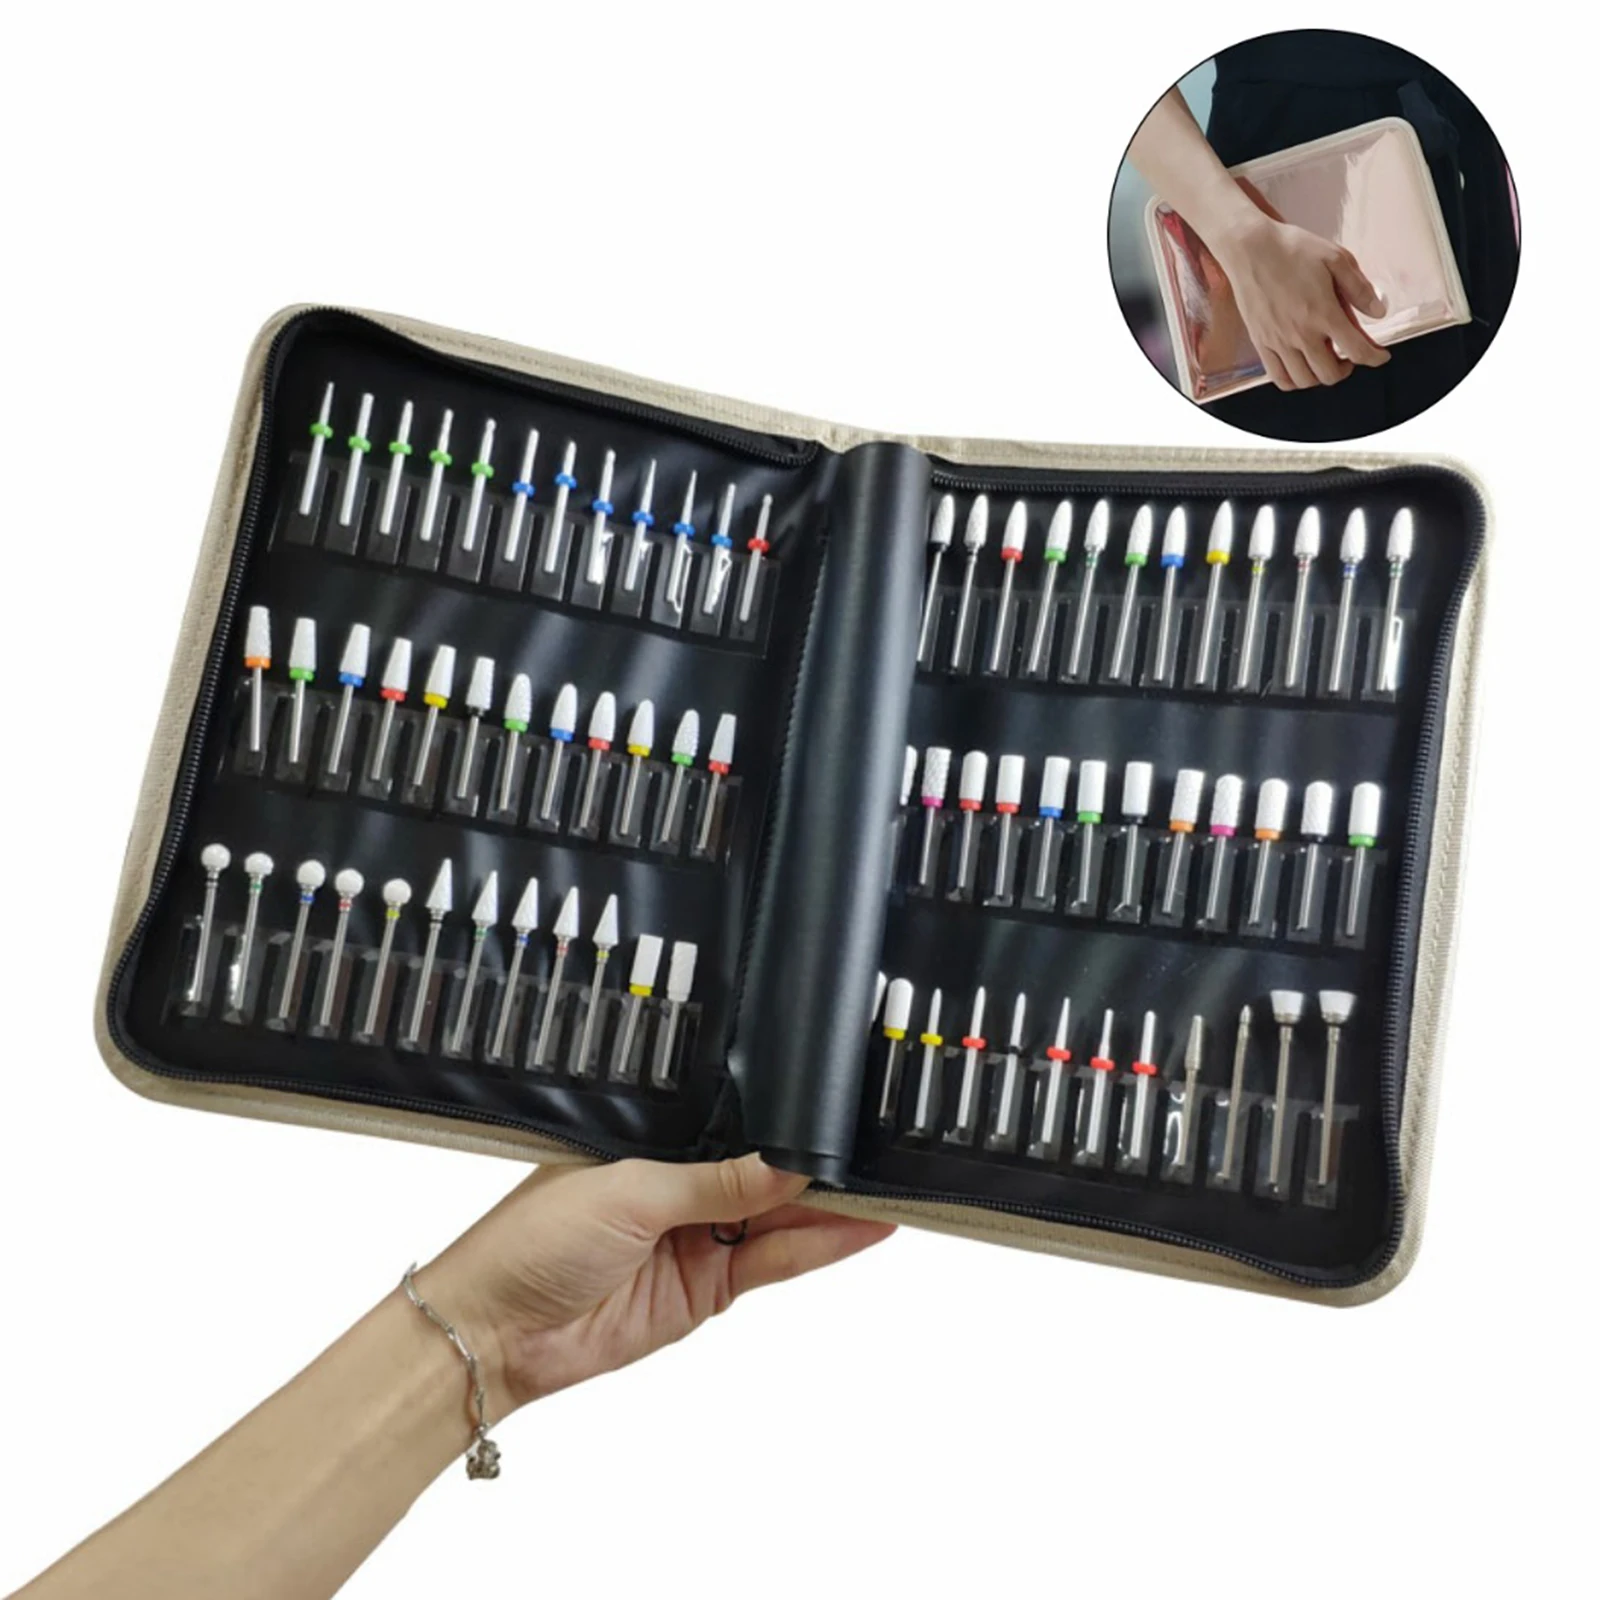 Folding Manicure Nail Art Drill Bits Display Holder Storage Bag Easy Carry